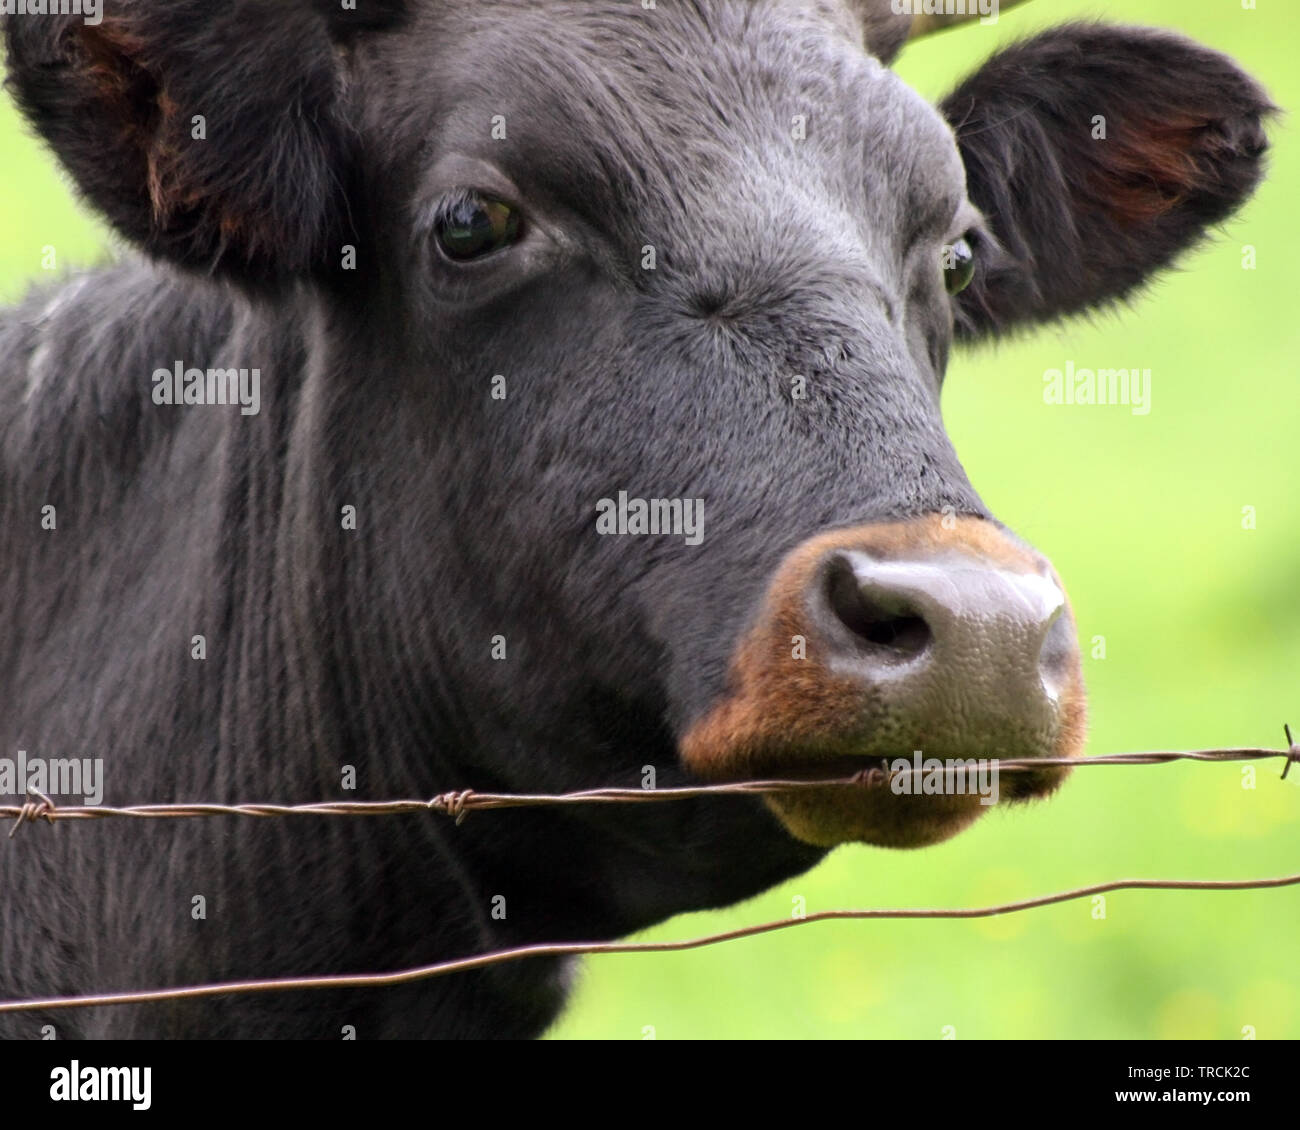 Close up portrait of a black cow with brown nose Stock Photo